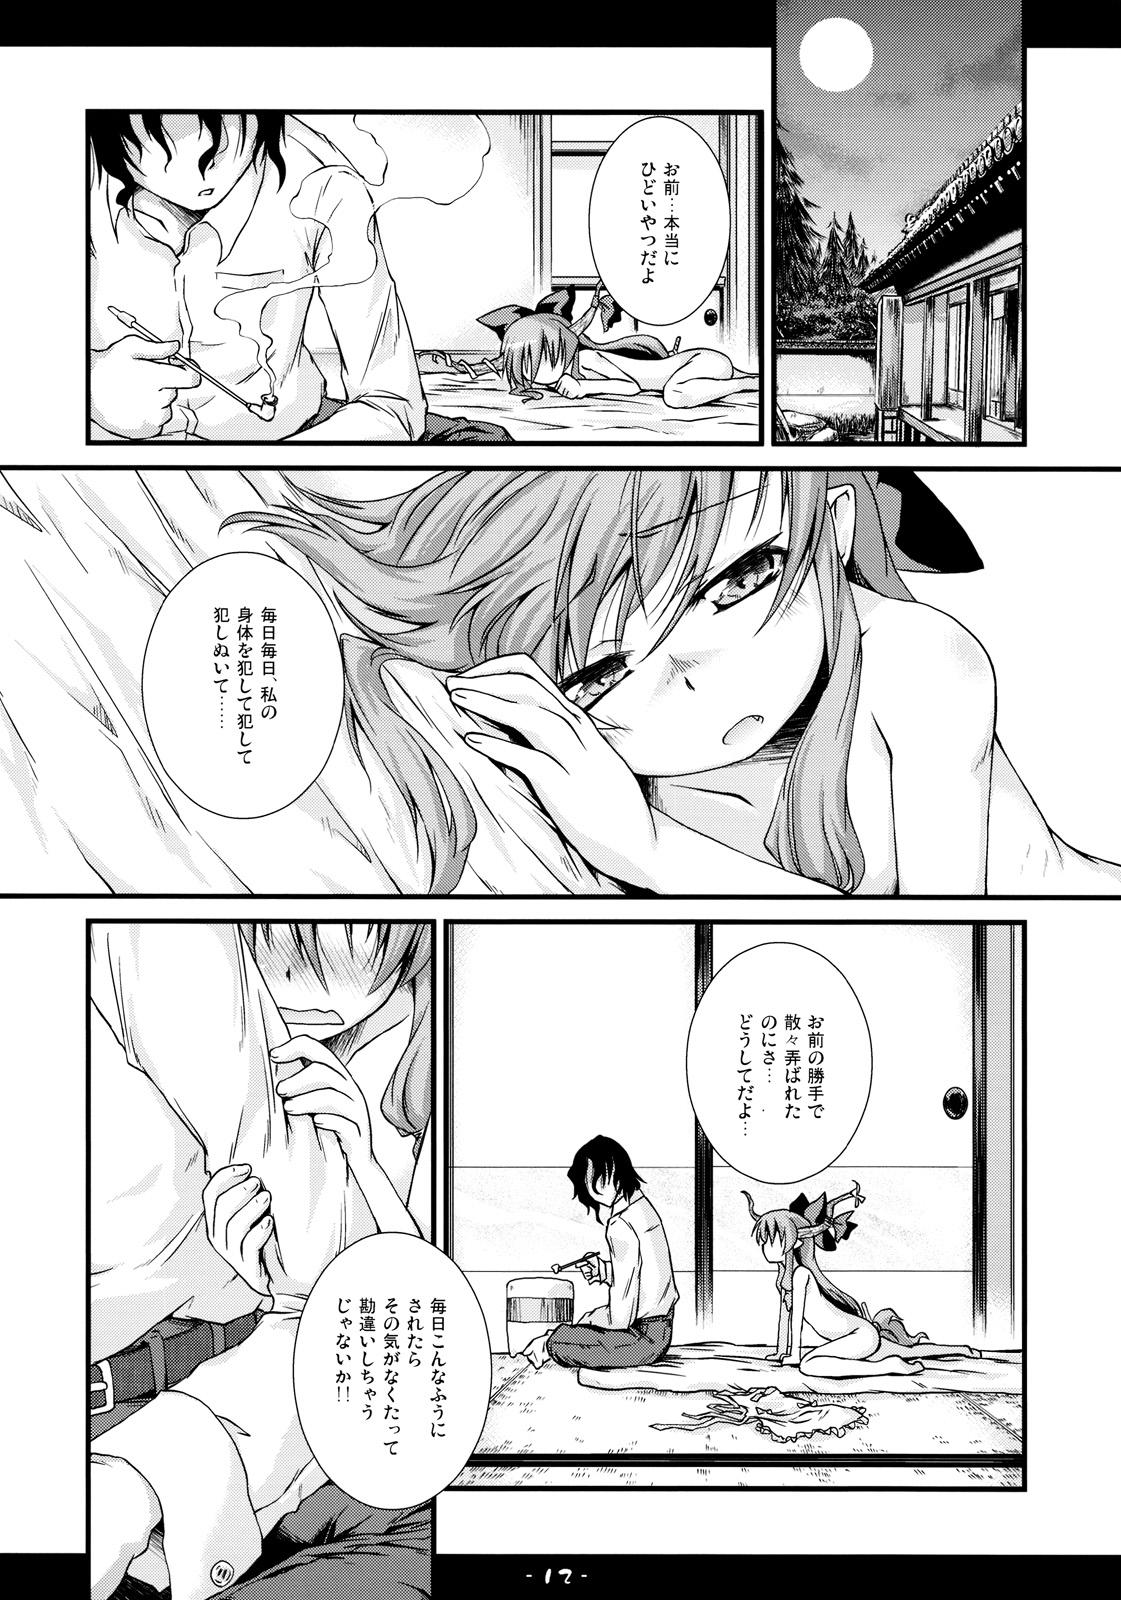 Russia Kyoujun Outbreak - Touhou project Making Love Porn - Page 12